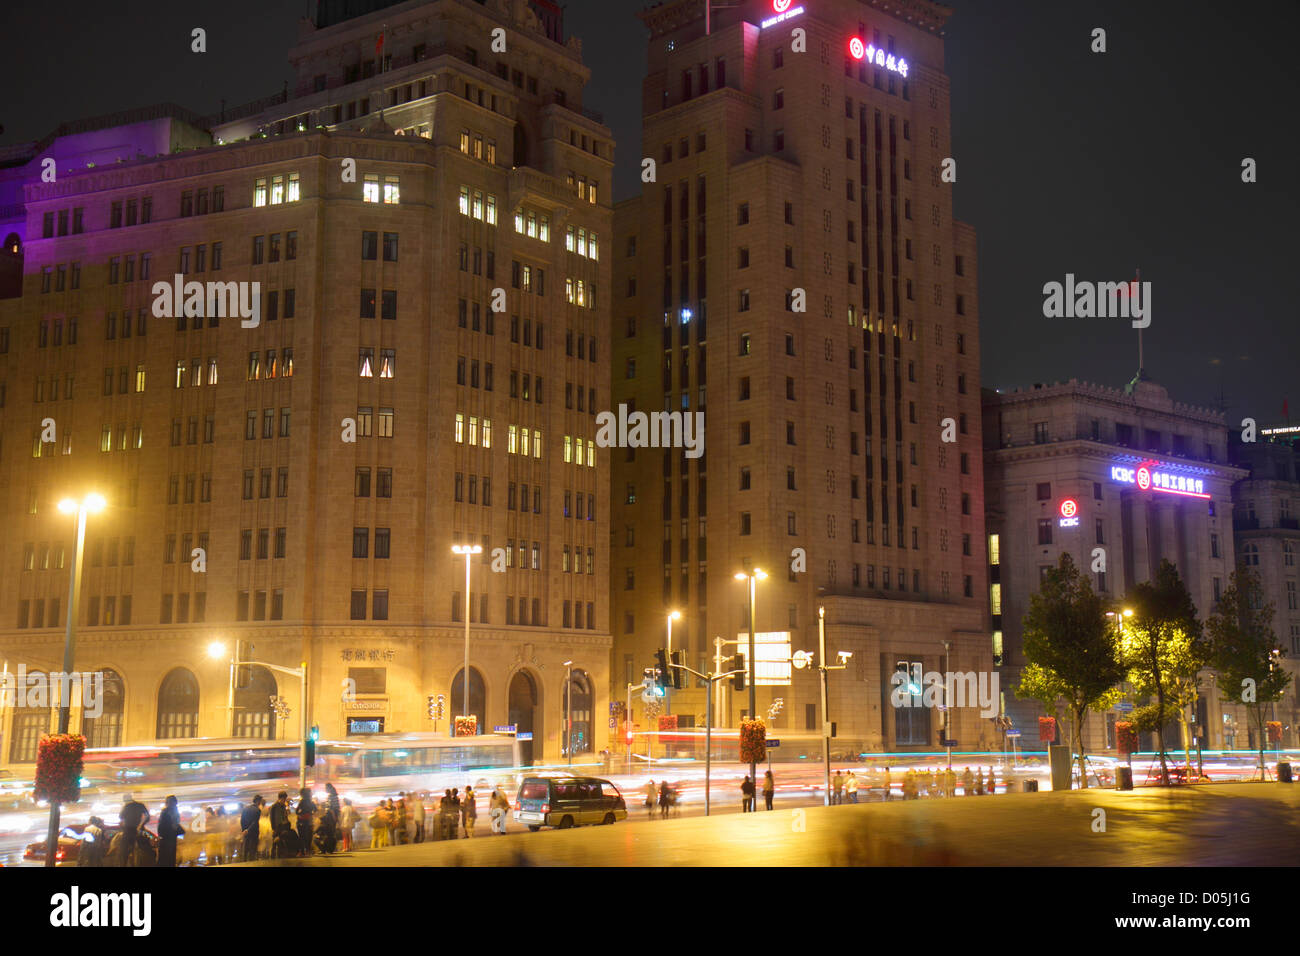 Shanghai China,Asia,Chinese,Oriental,Huangpu District,The Bund,Zhongshan Road,National Day Golden Week,Art Deco Neo Classical style buildings,city sky Stock Photo